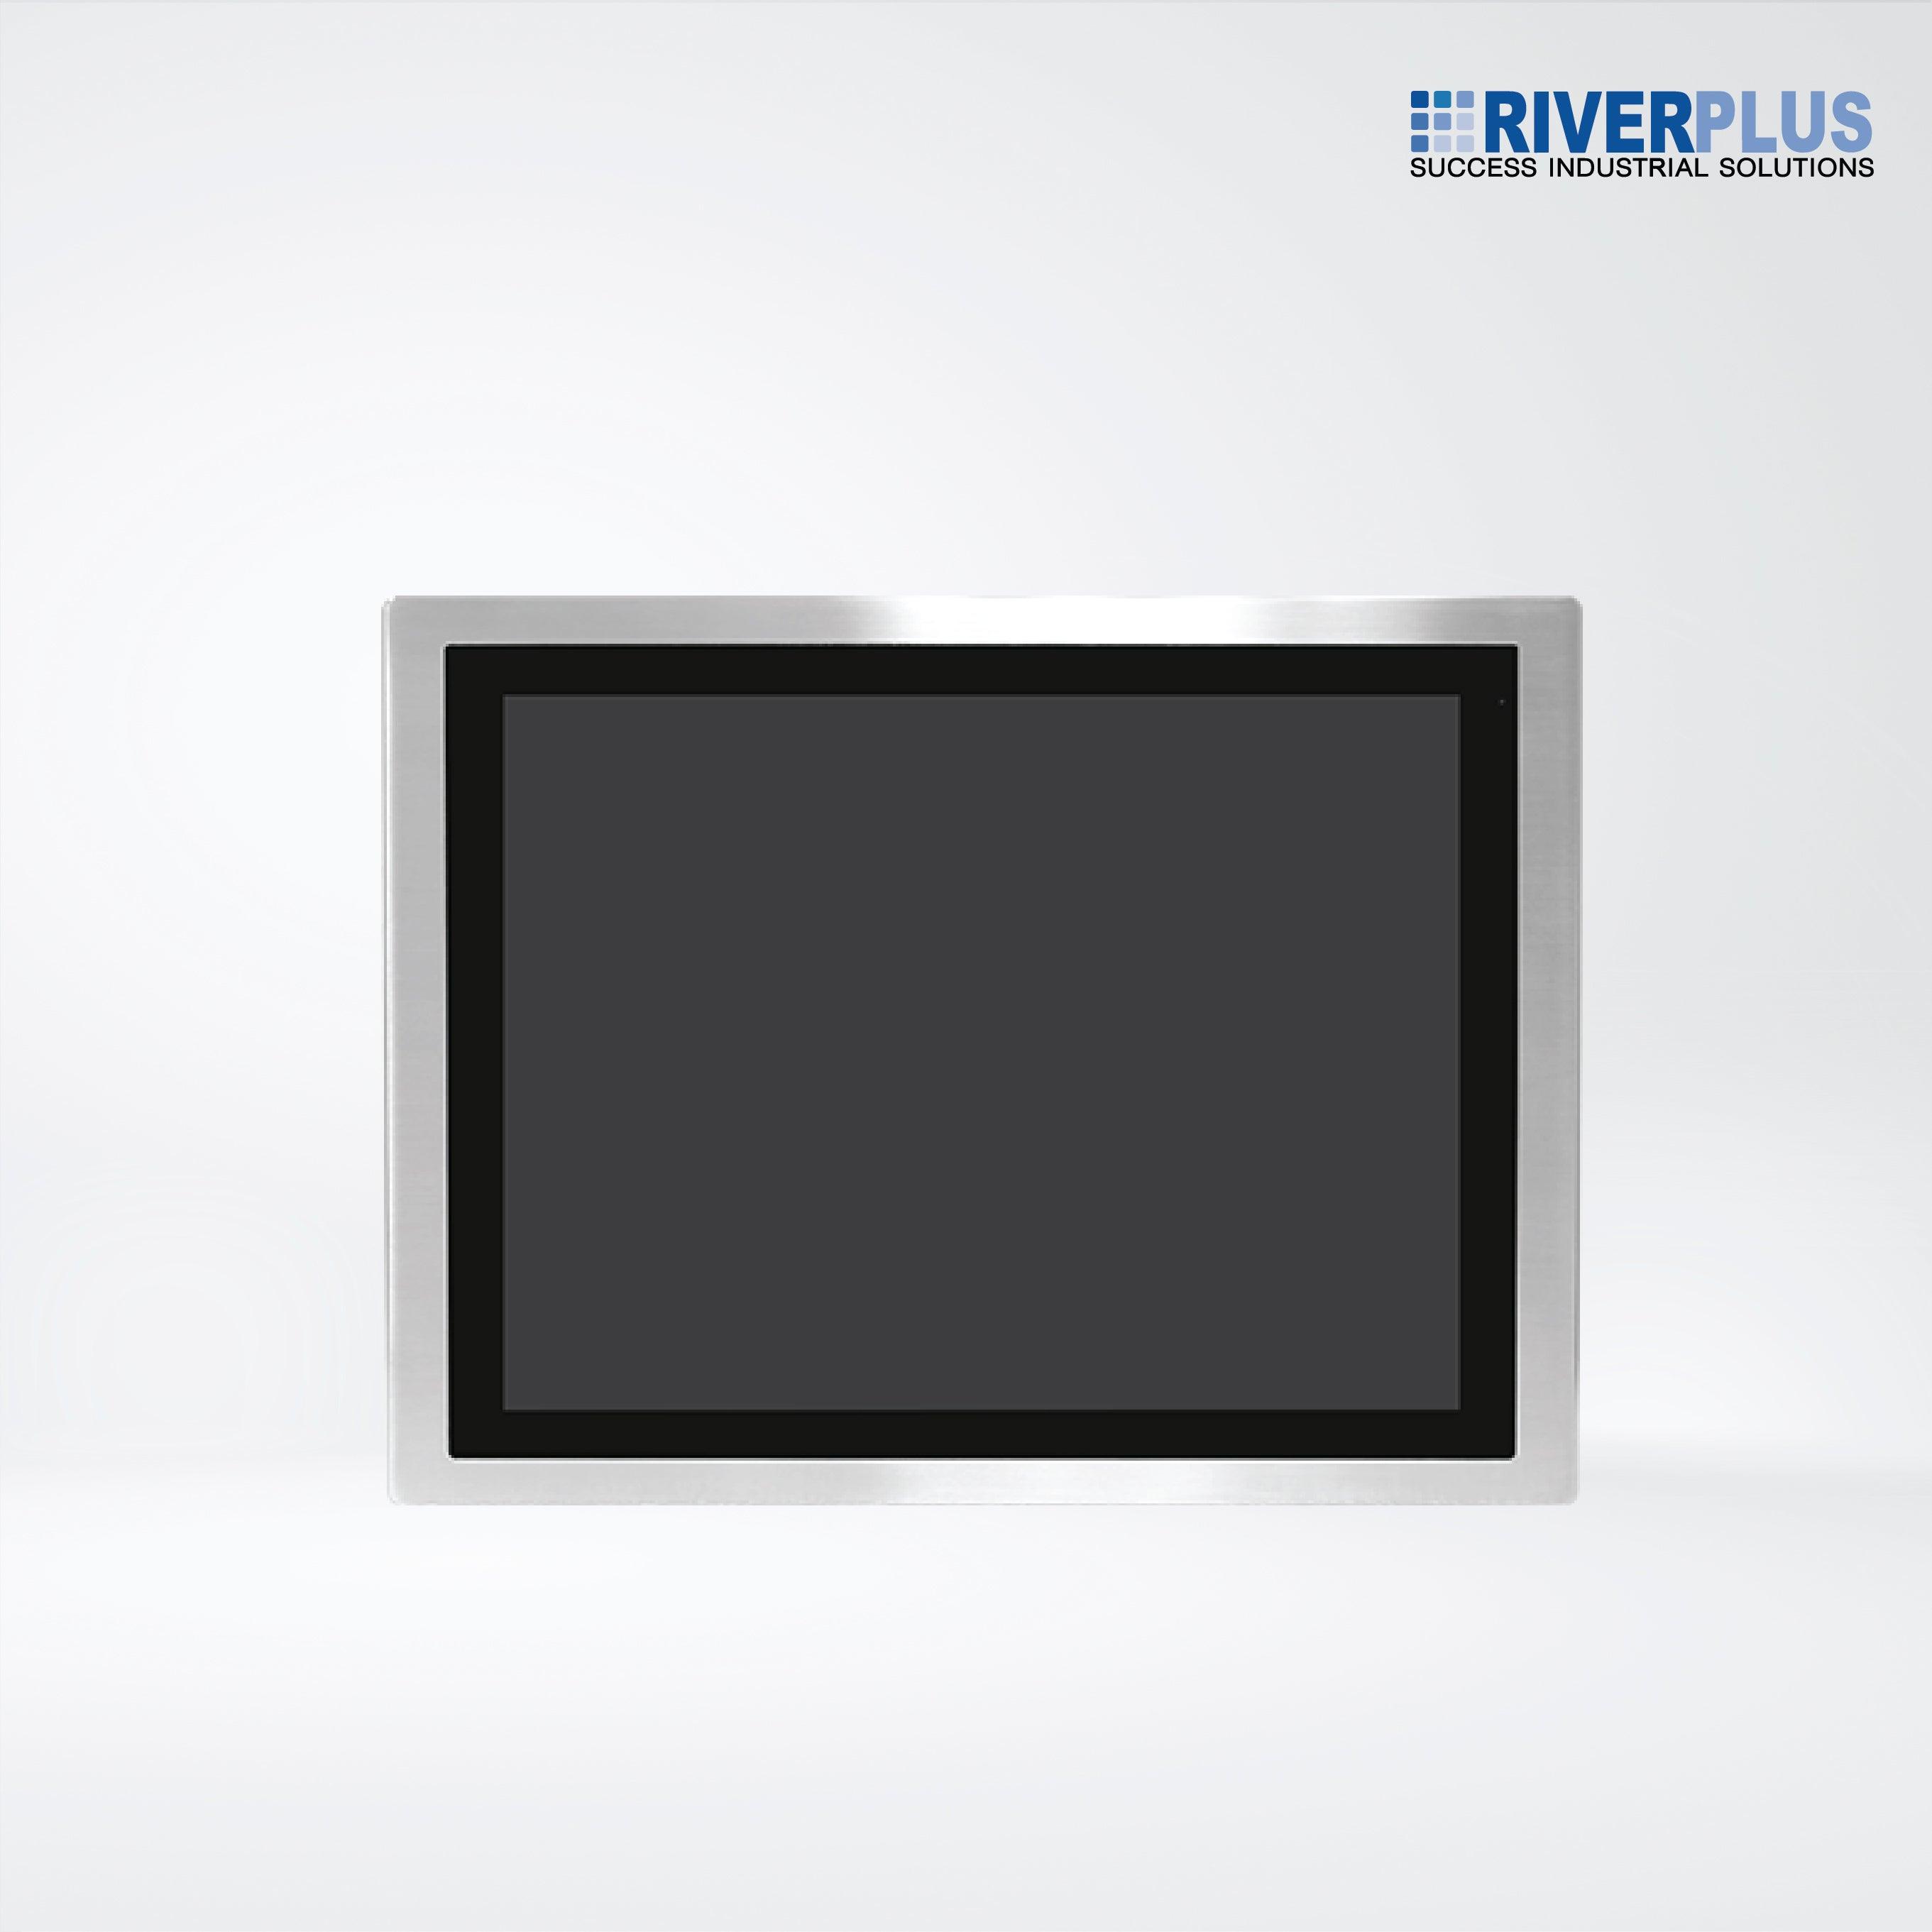 FABS-119R 19” Flat Front Panel IP66 Stainless Chassis Display - Riverplus